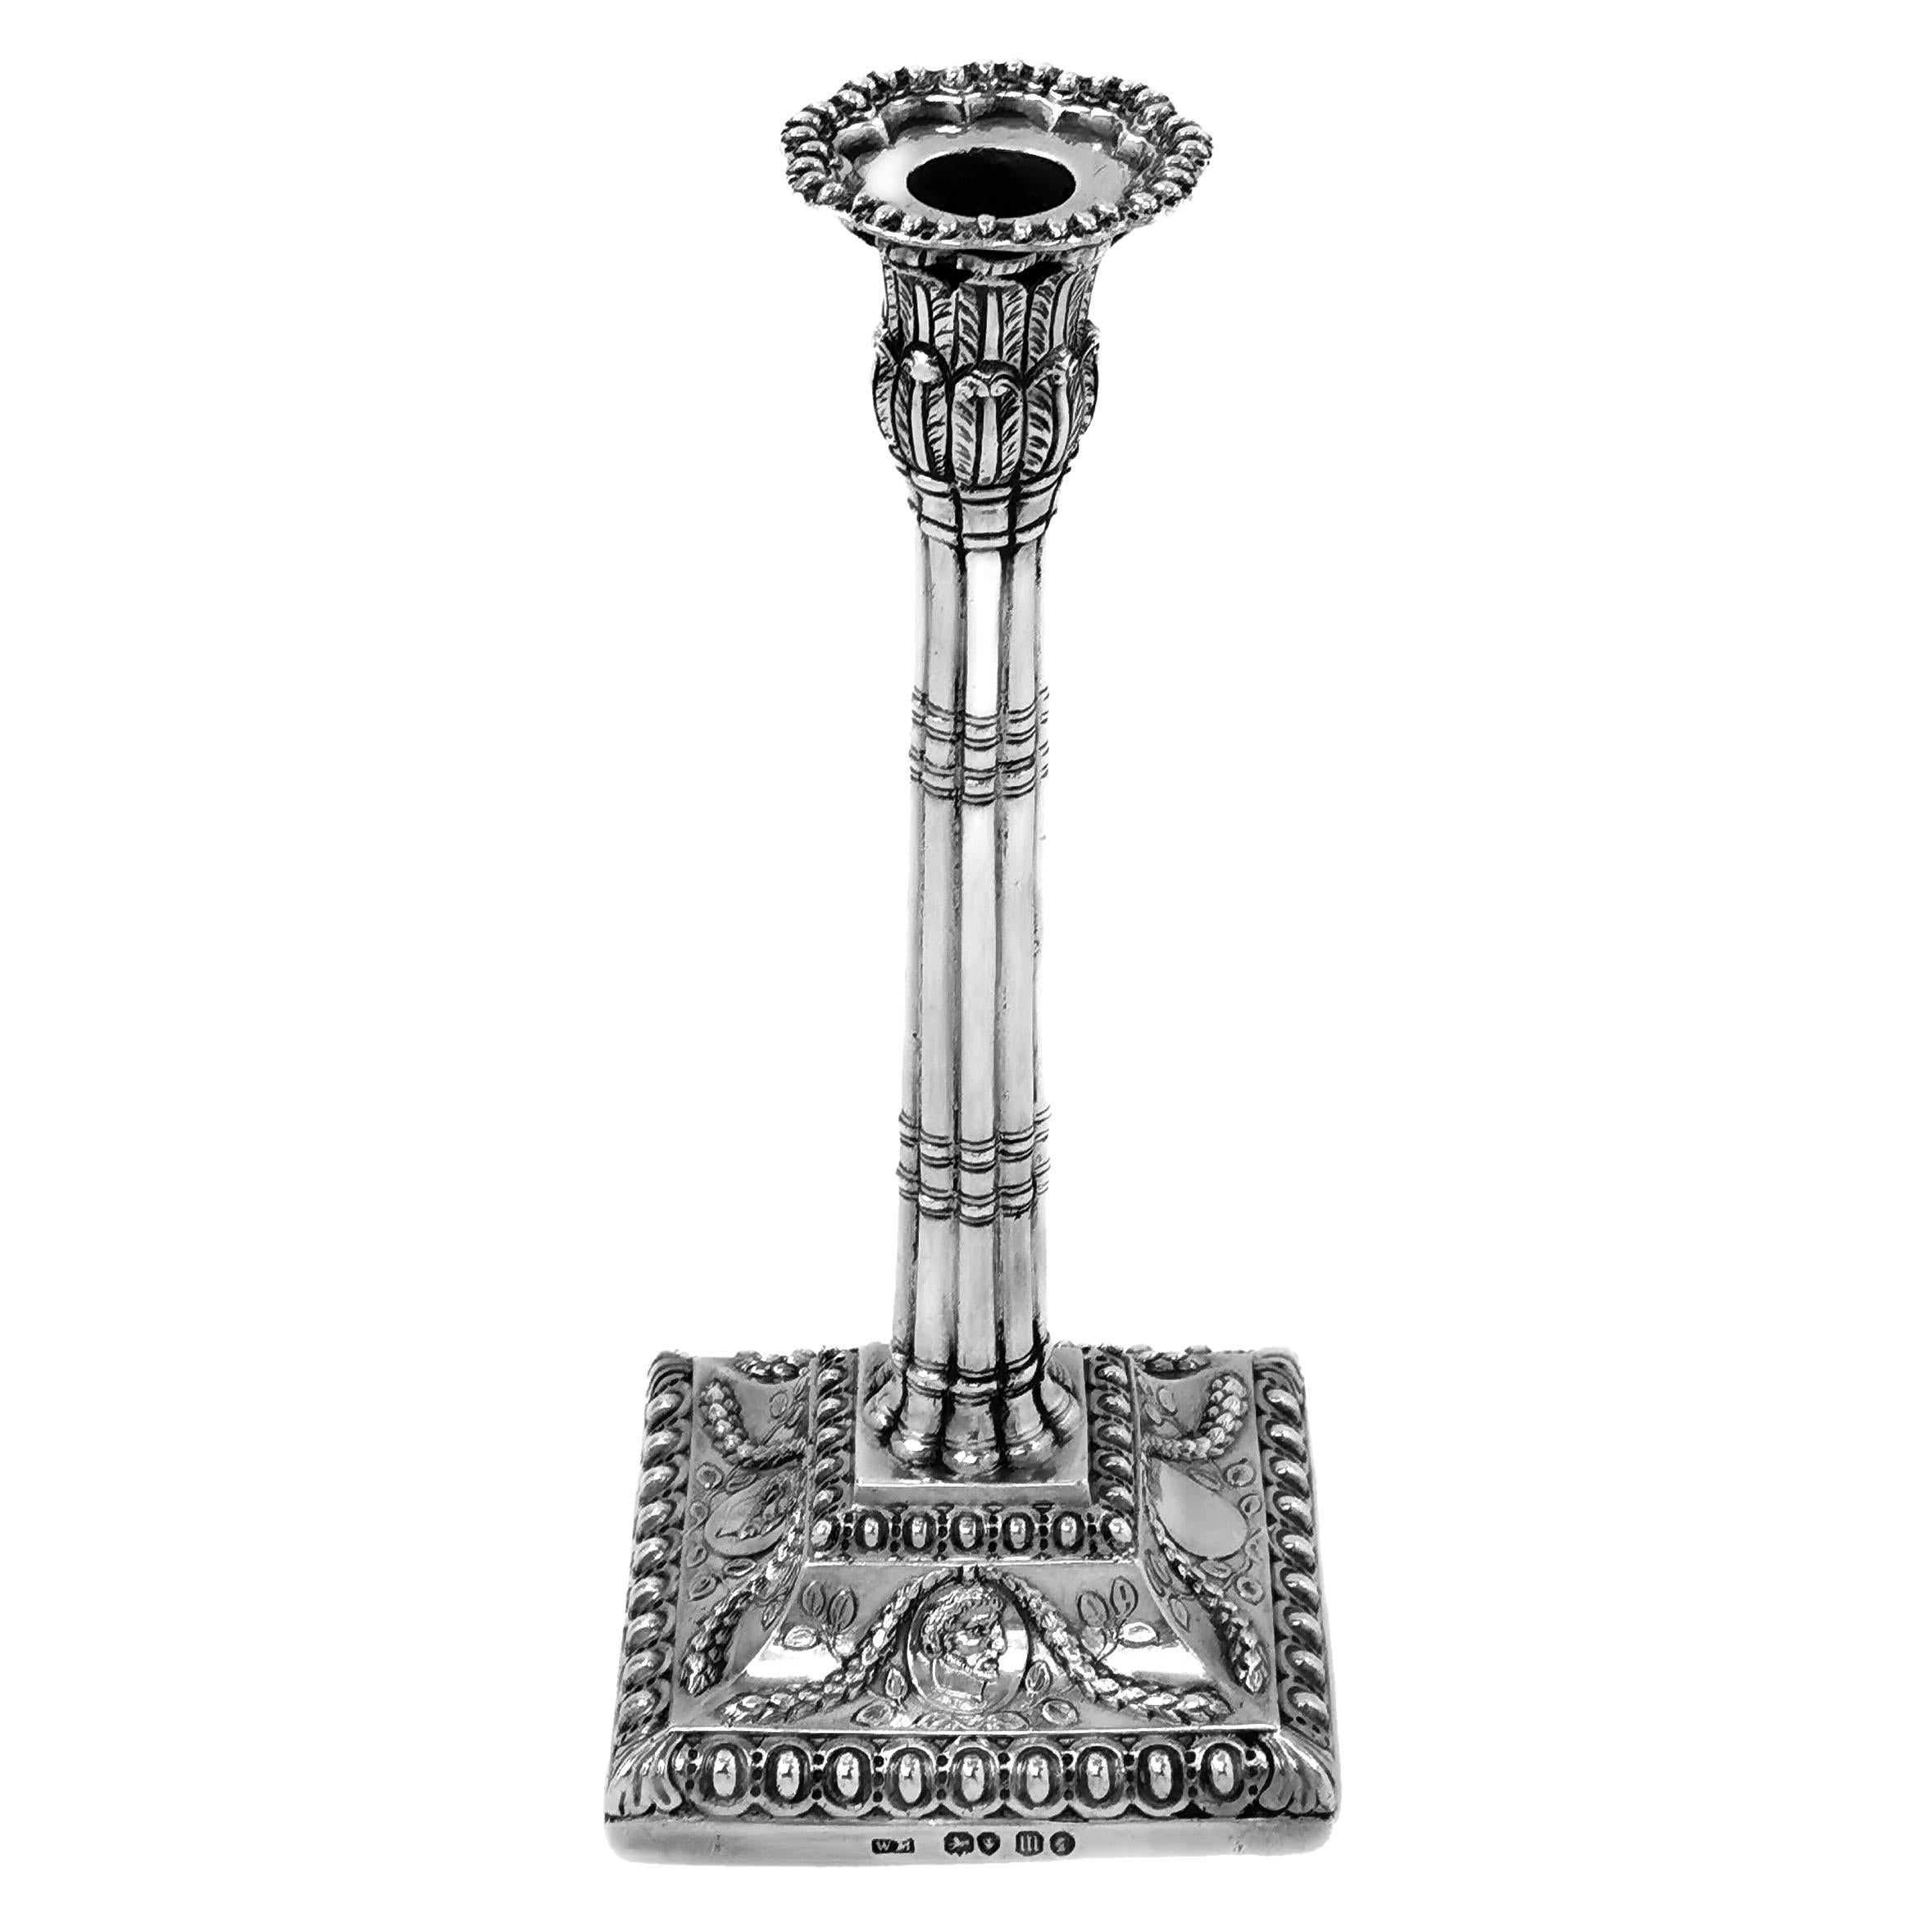 A lovely Antique Victorian Sterling Silver Taper Stick in the Adams Style of the 1770s. The Candlestick has an elegant cluster column with a stylised leaf capital. The 

Made in London, England in 1867 by Walter Morrisse.

Approx. Weight - 252g /